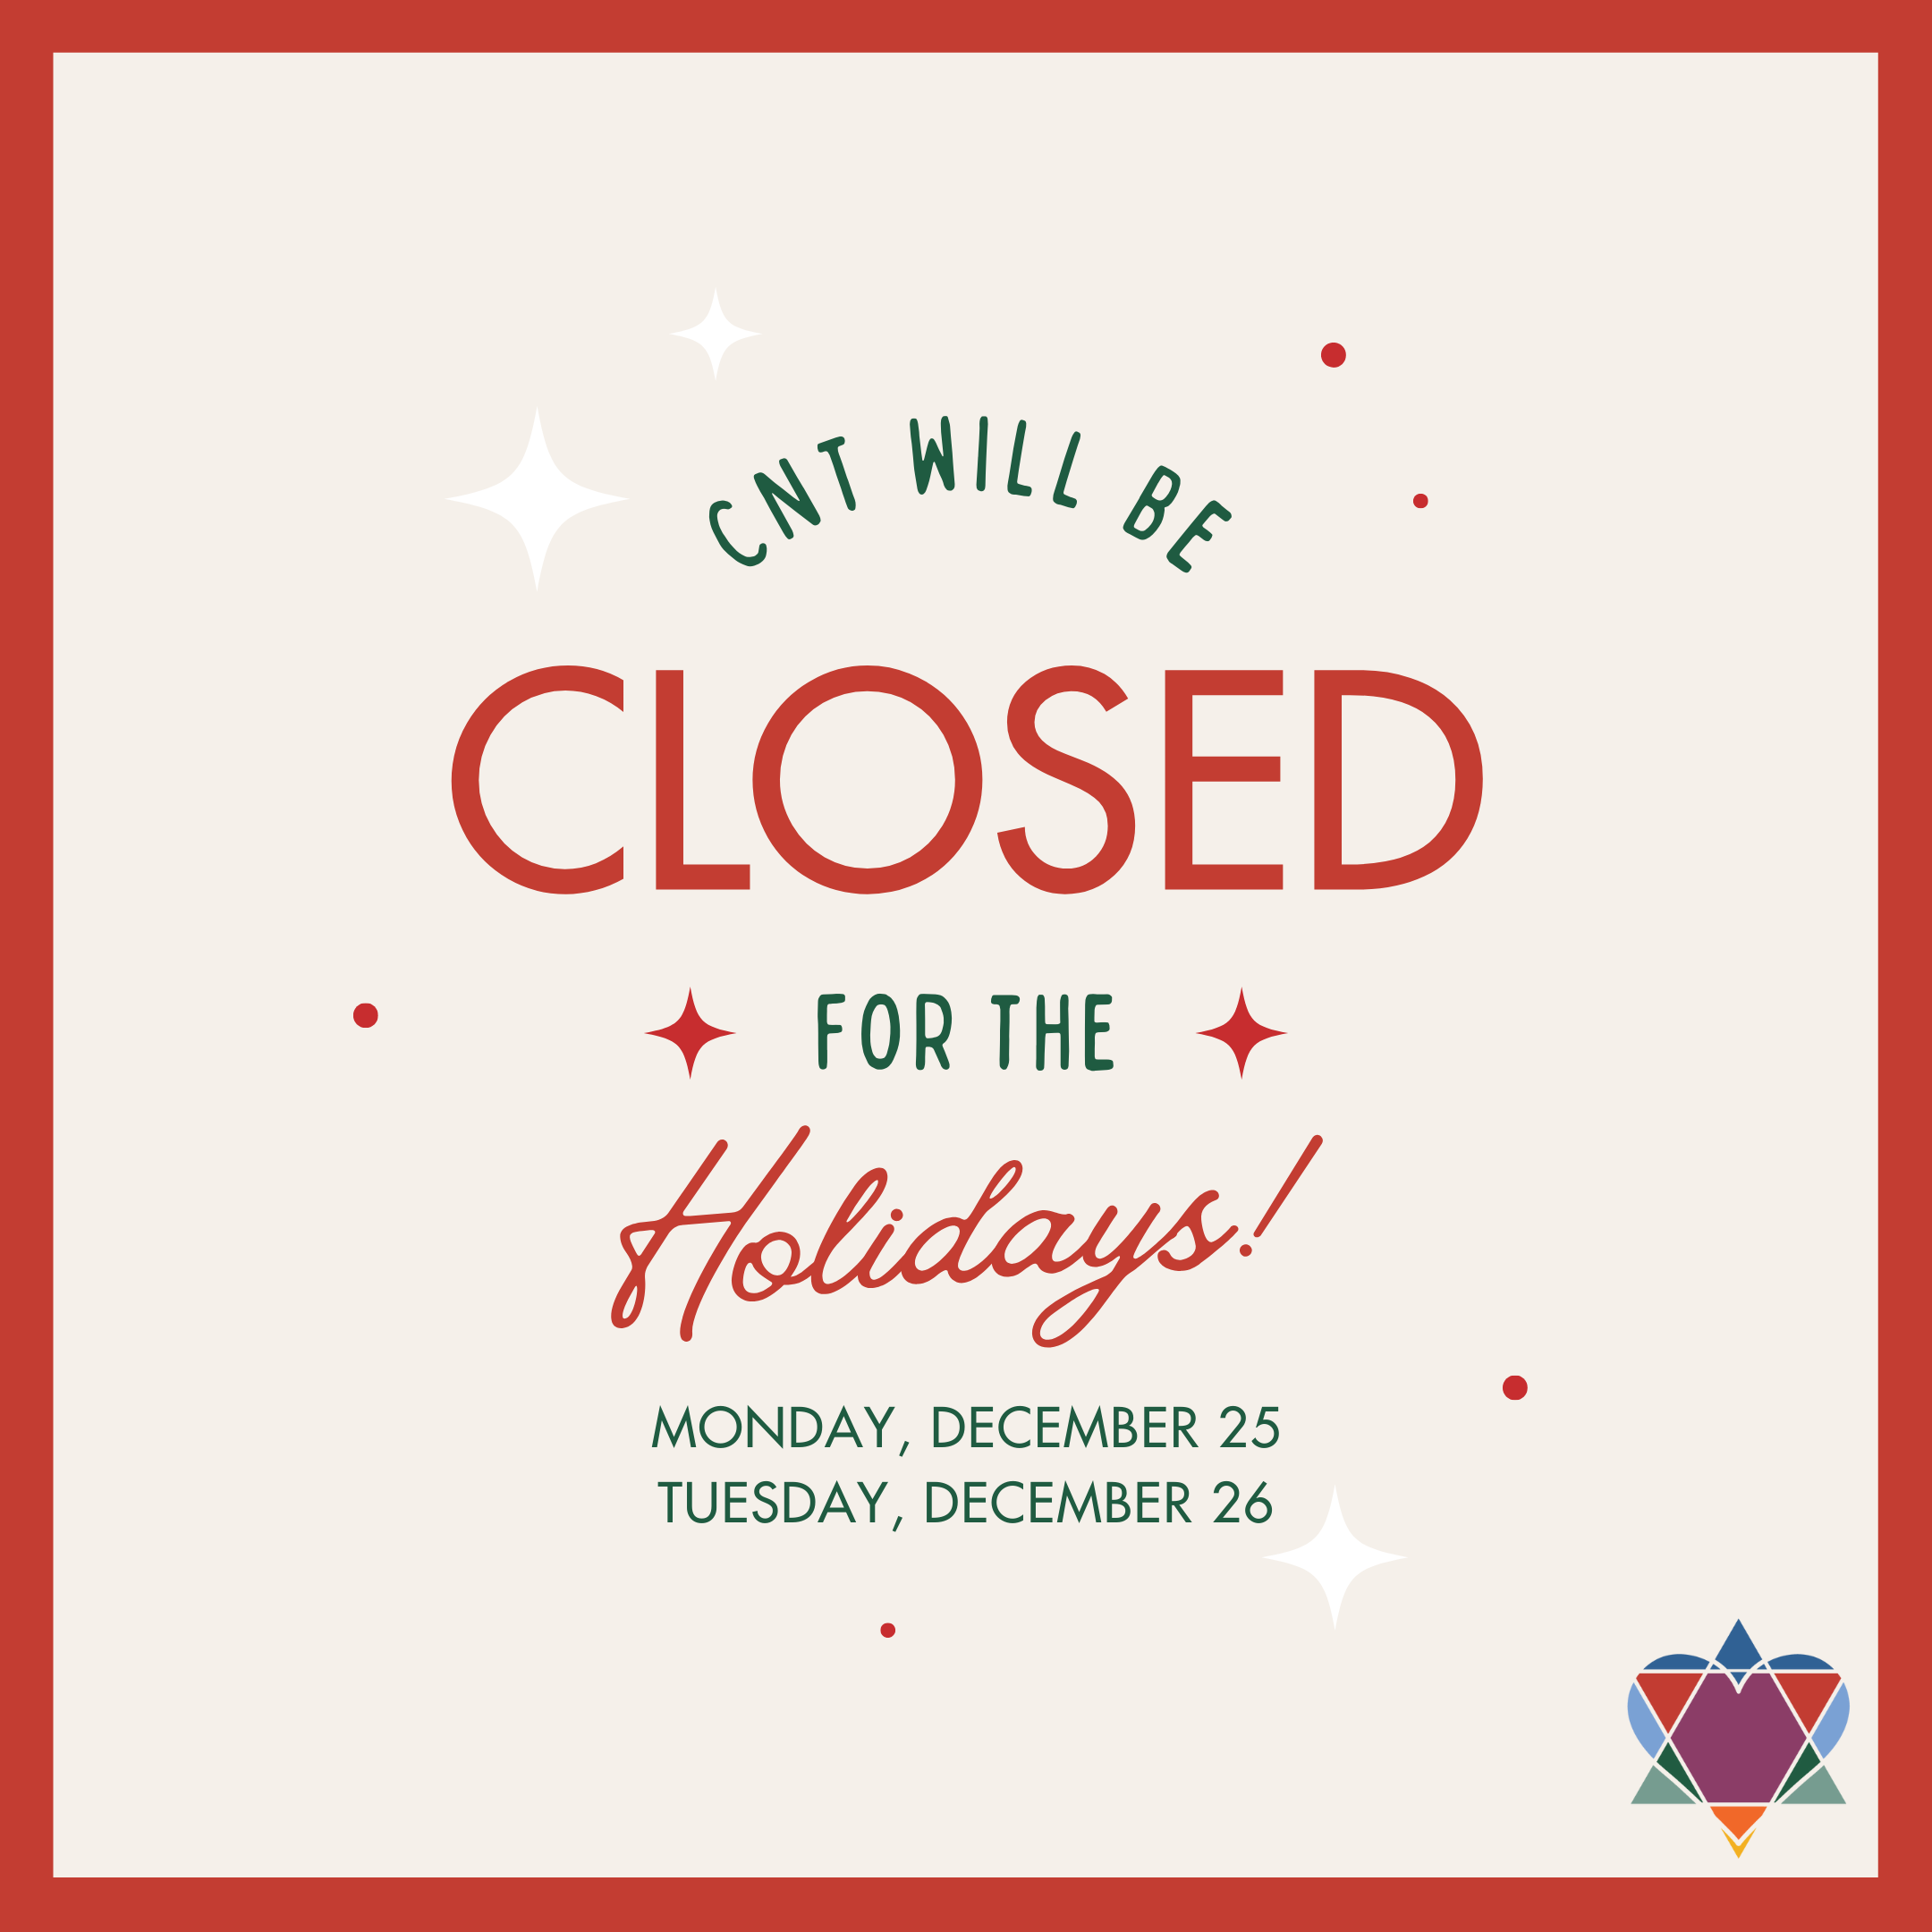 CNT CLOSED FOR THE HOLIDAYS